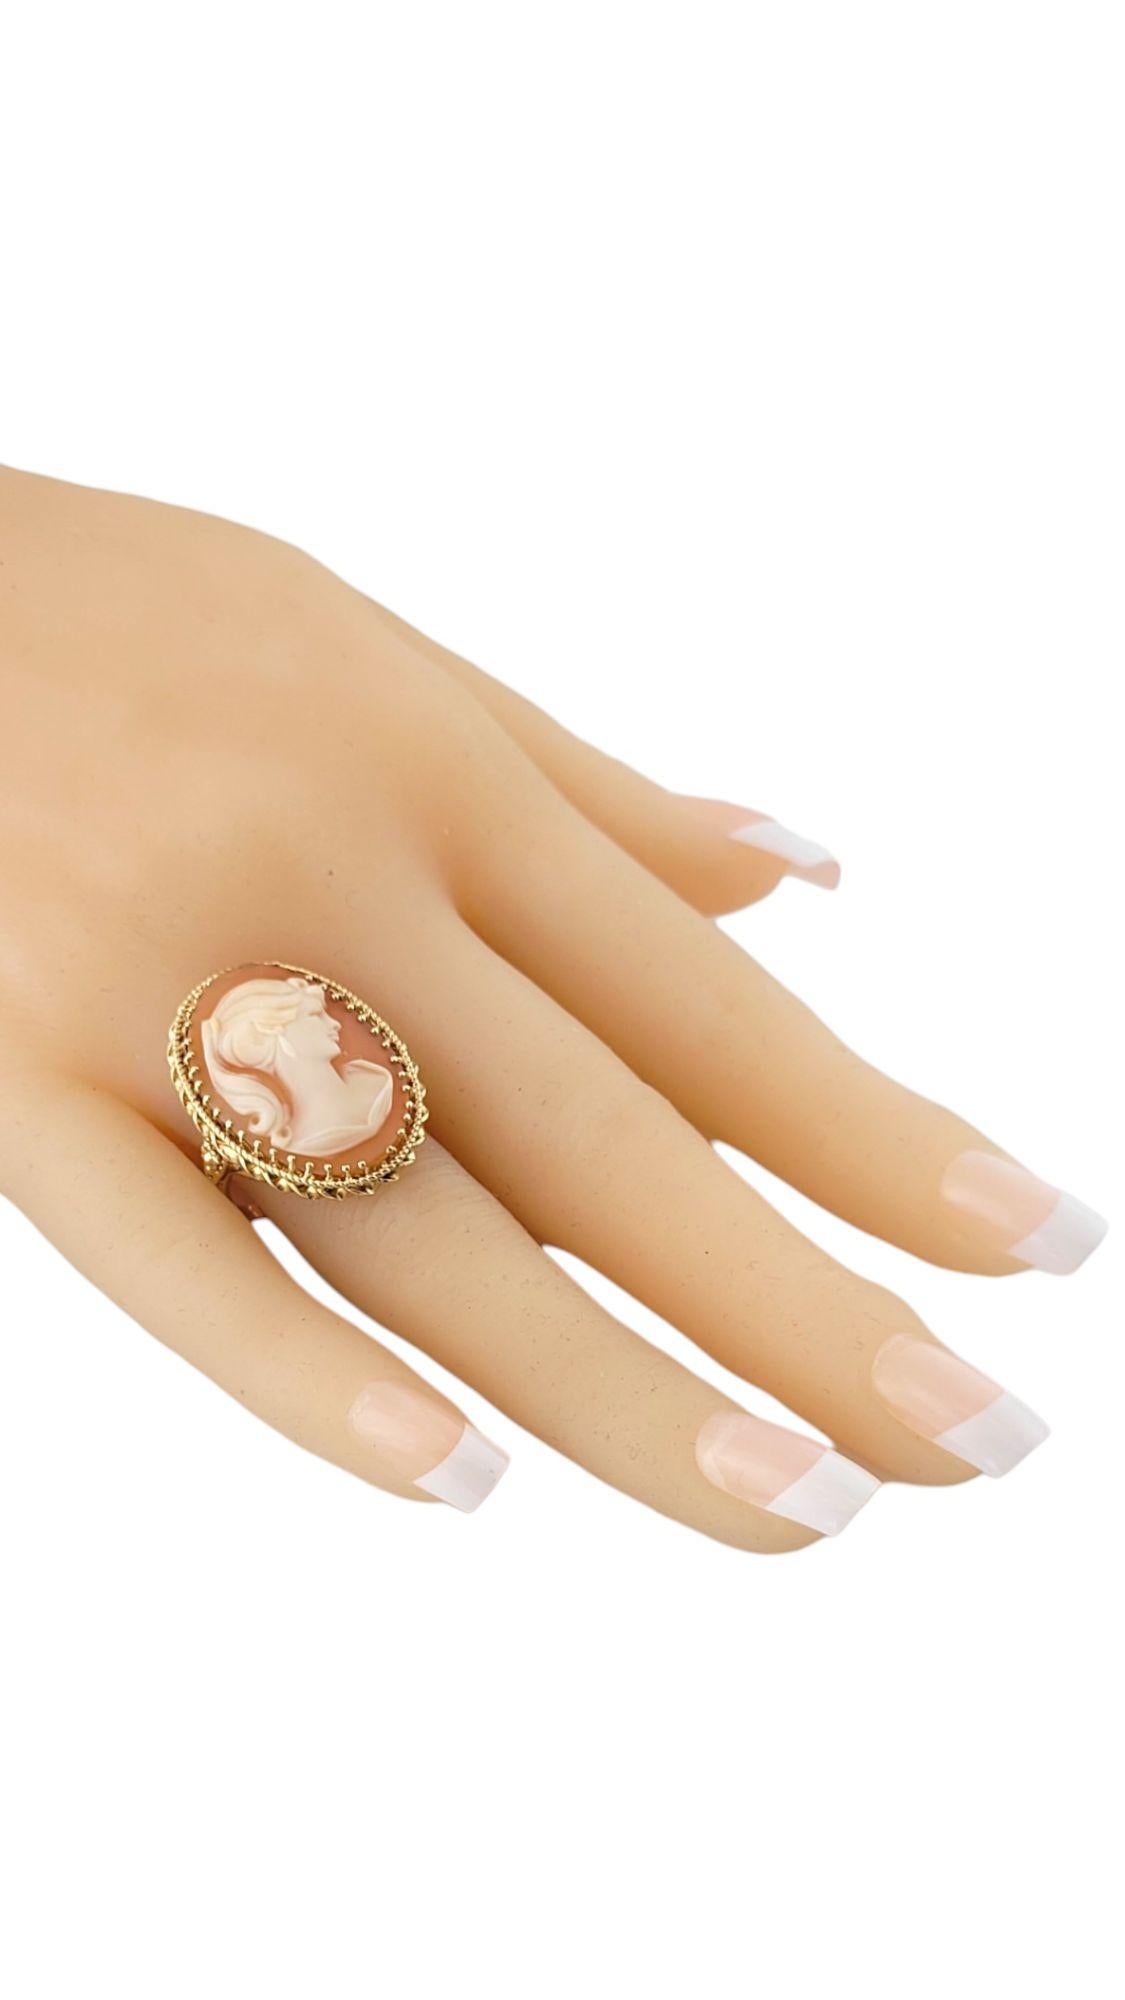 10K Yellow Gold Cameo Ring Size 8 3/4 #14571 For Sale 3